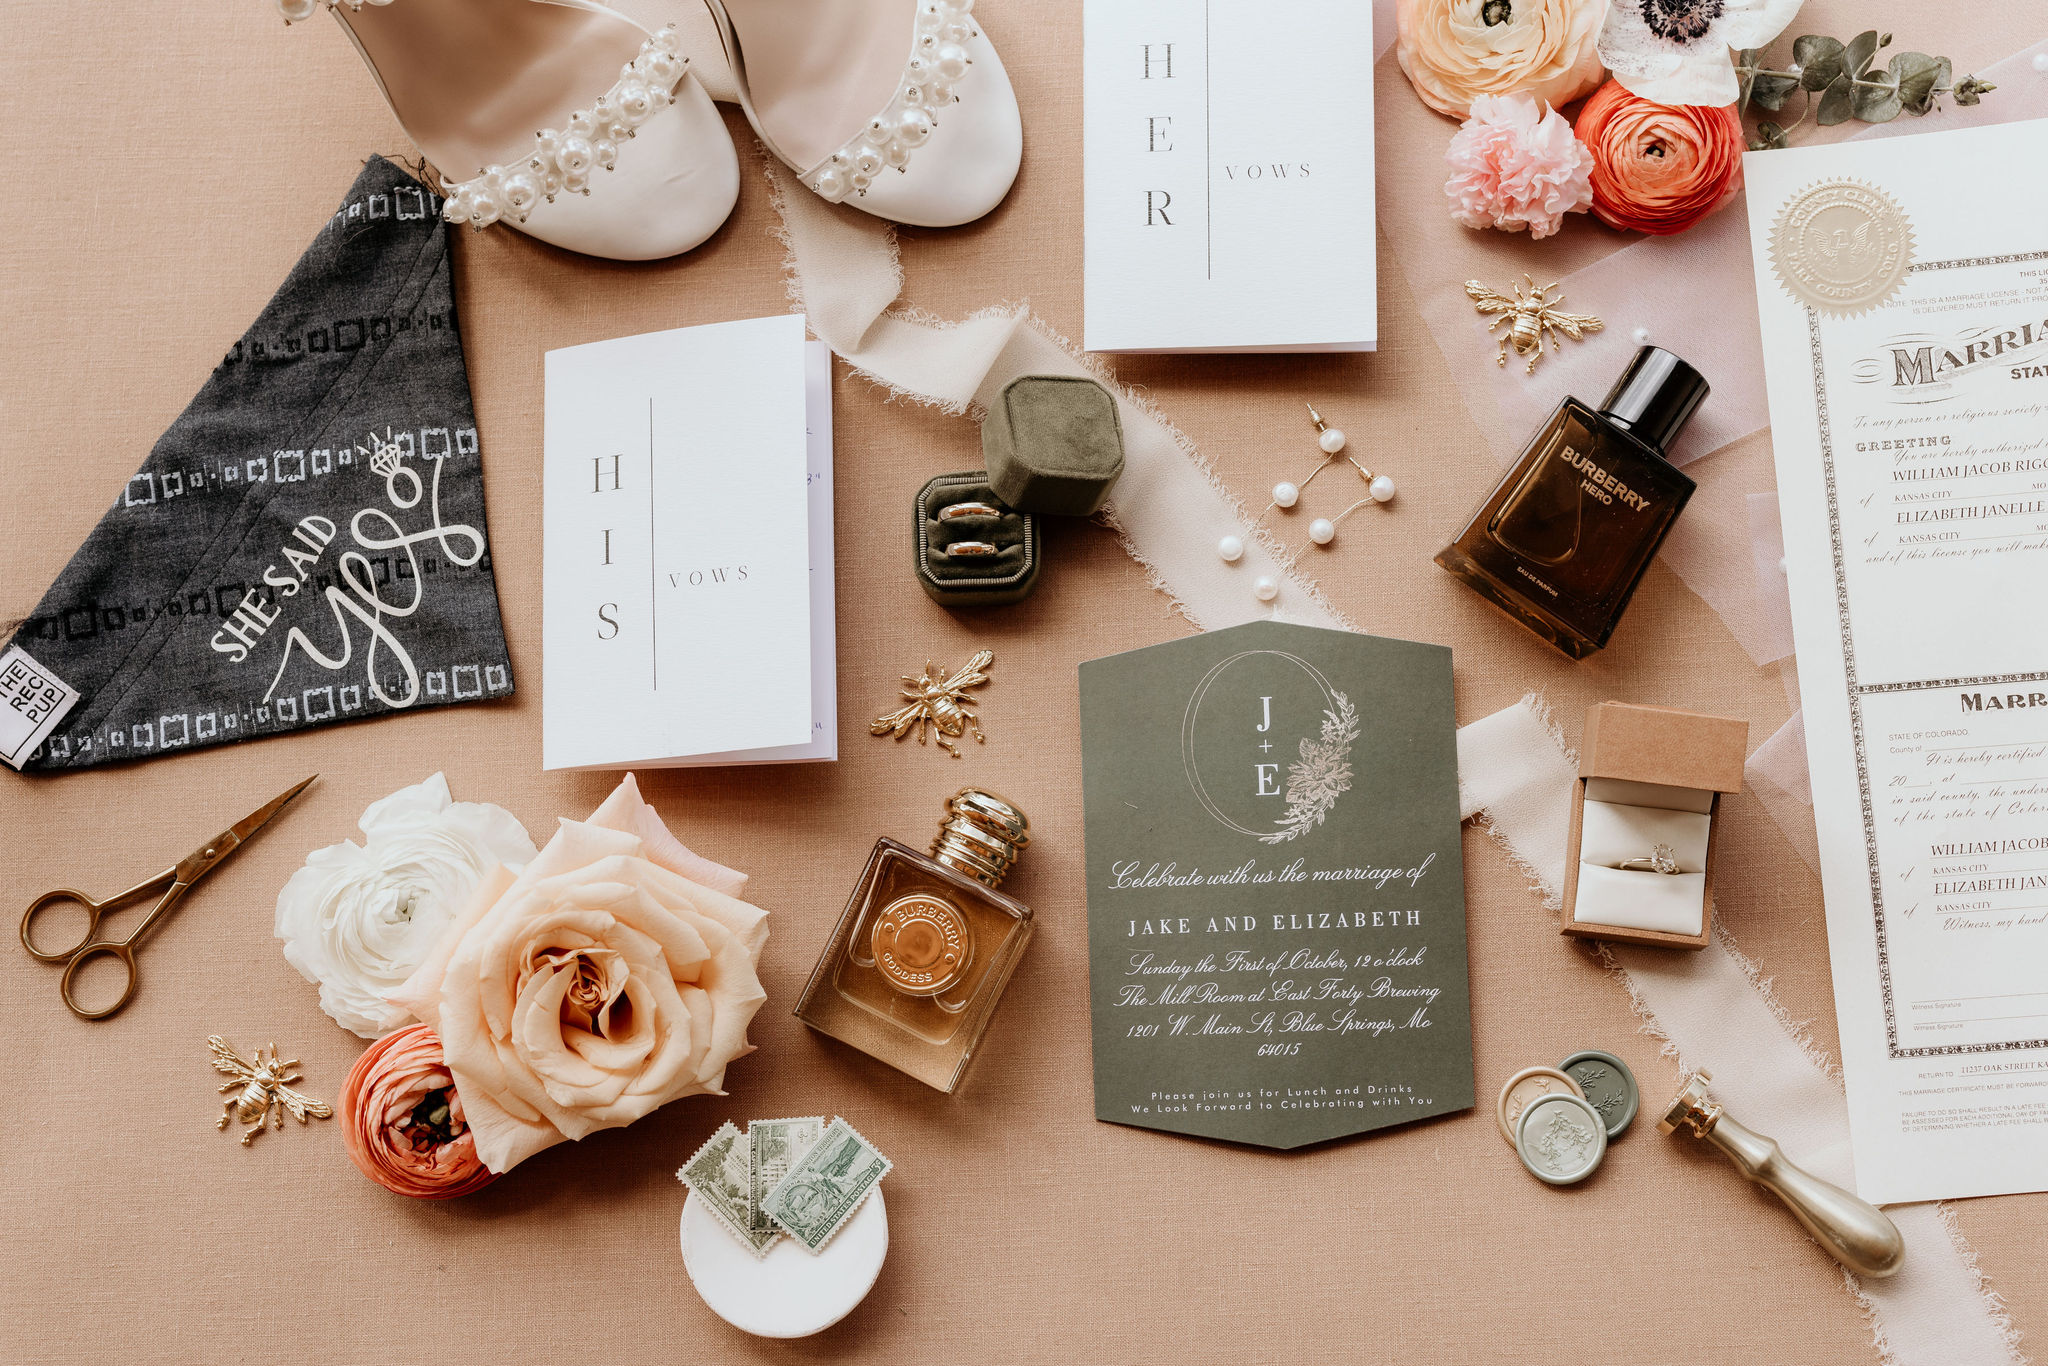 photo of wedding day details including wedding rings, wedding attire, wedding save the date